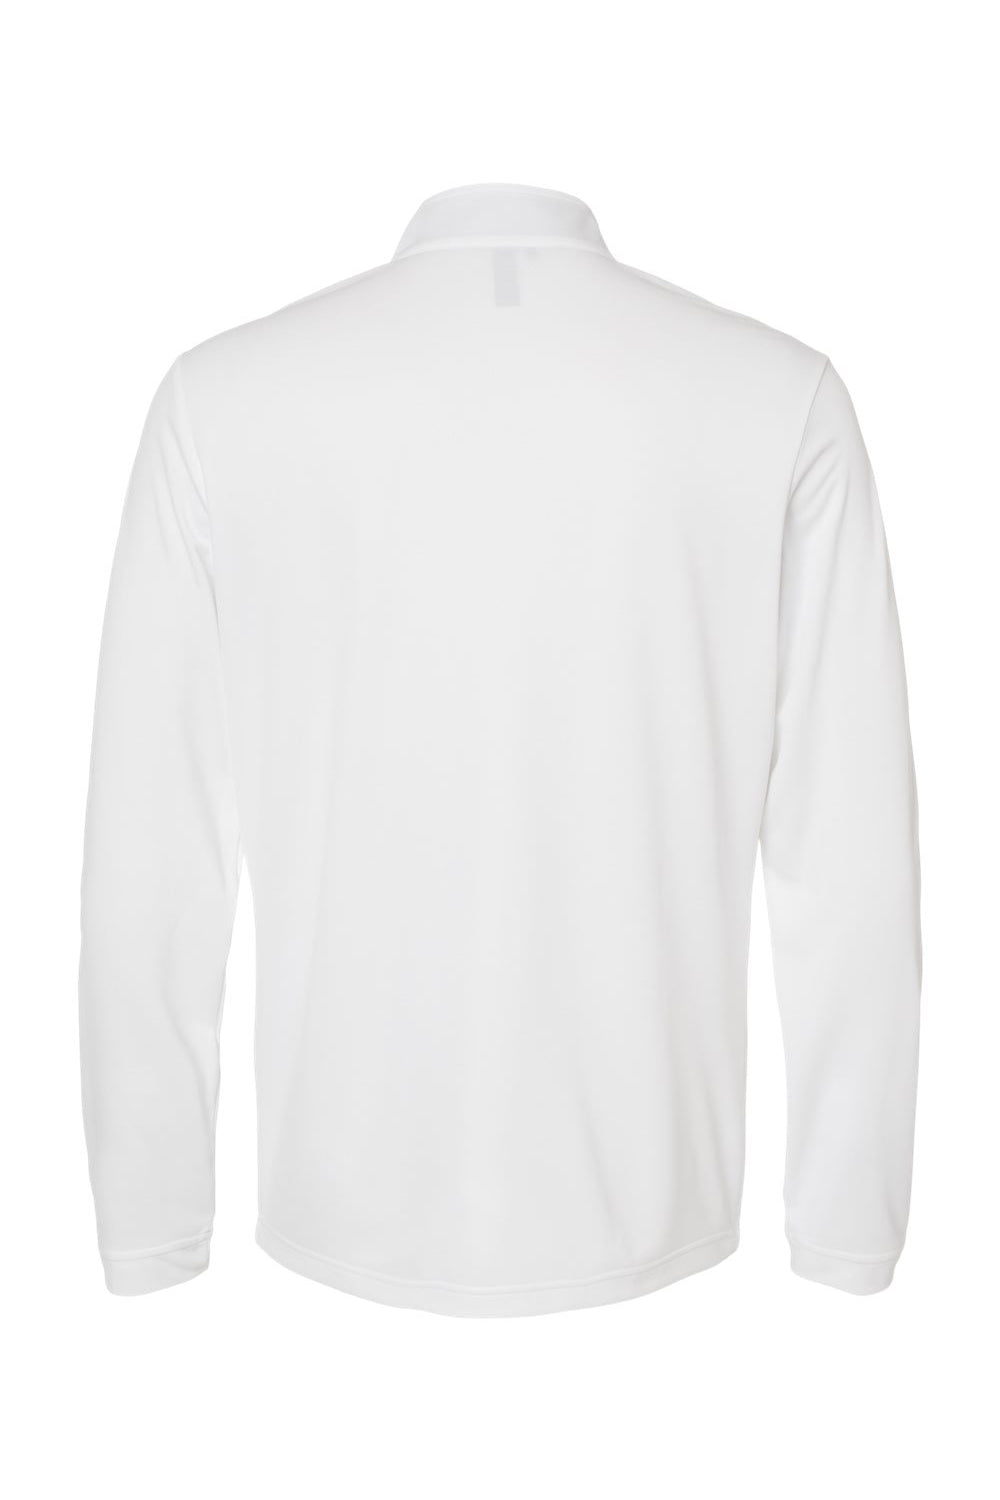 Adidas A280 Mens 1/4 Zip Pullover White/Carbon Grey Flat Back